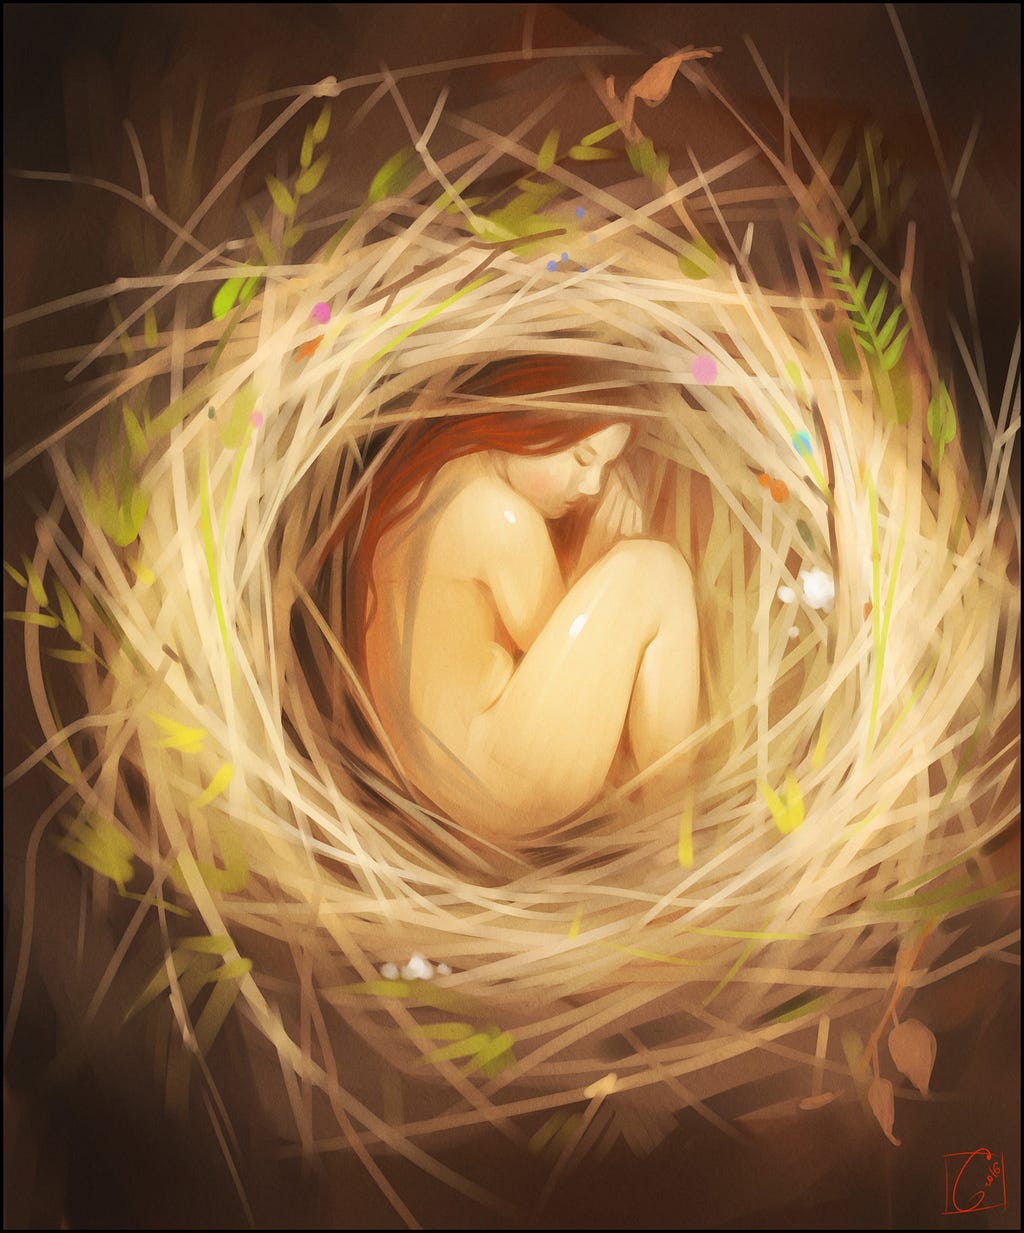 a red-haired woman lying in a shell-shaped bird’s nest representing her birth